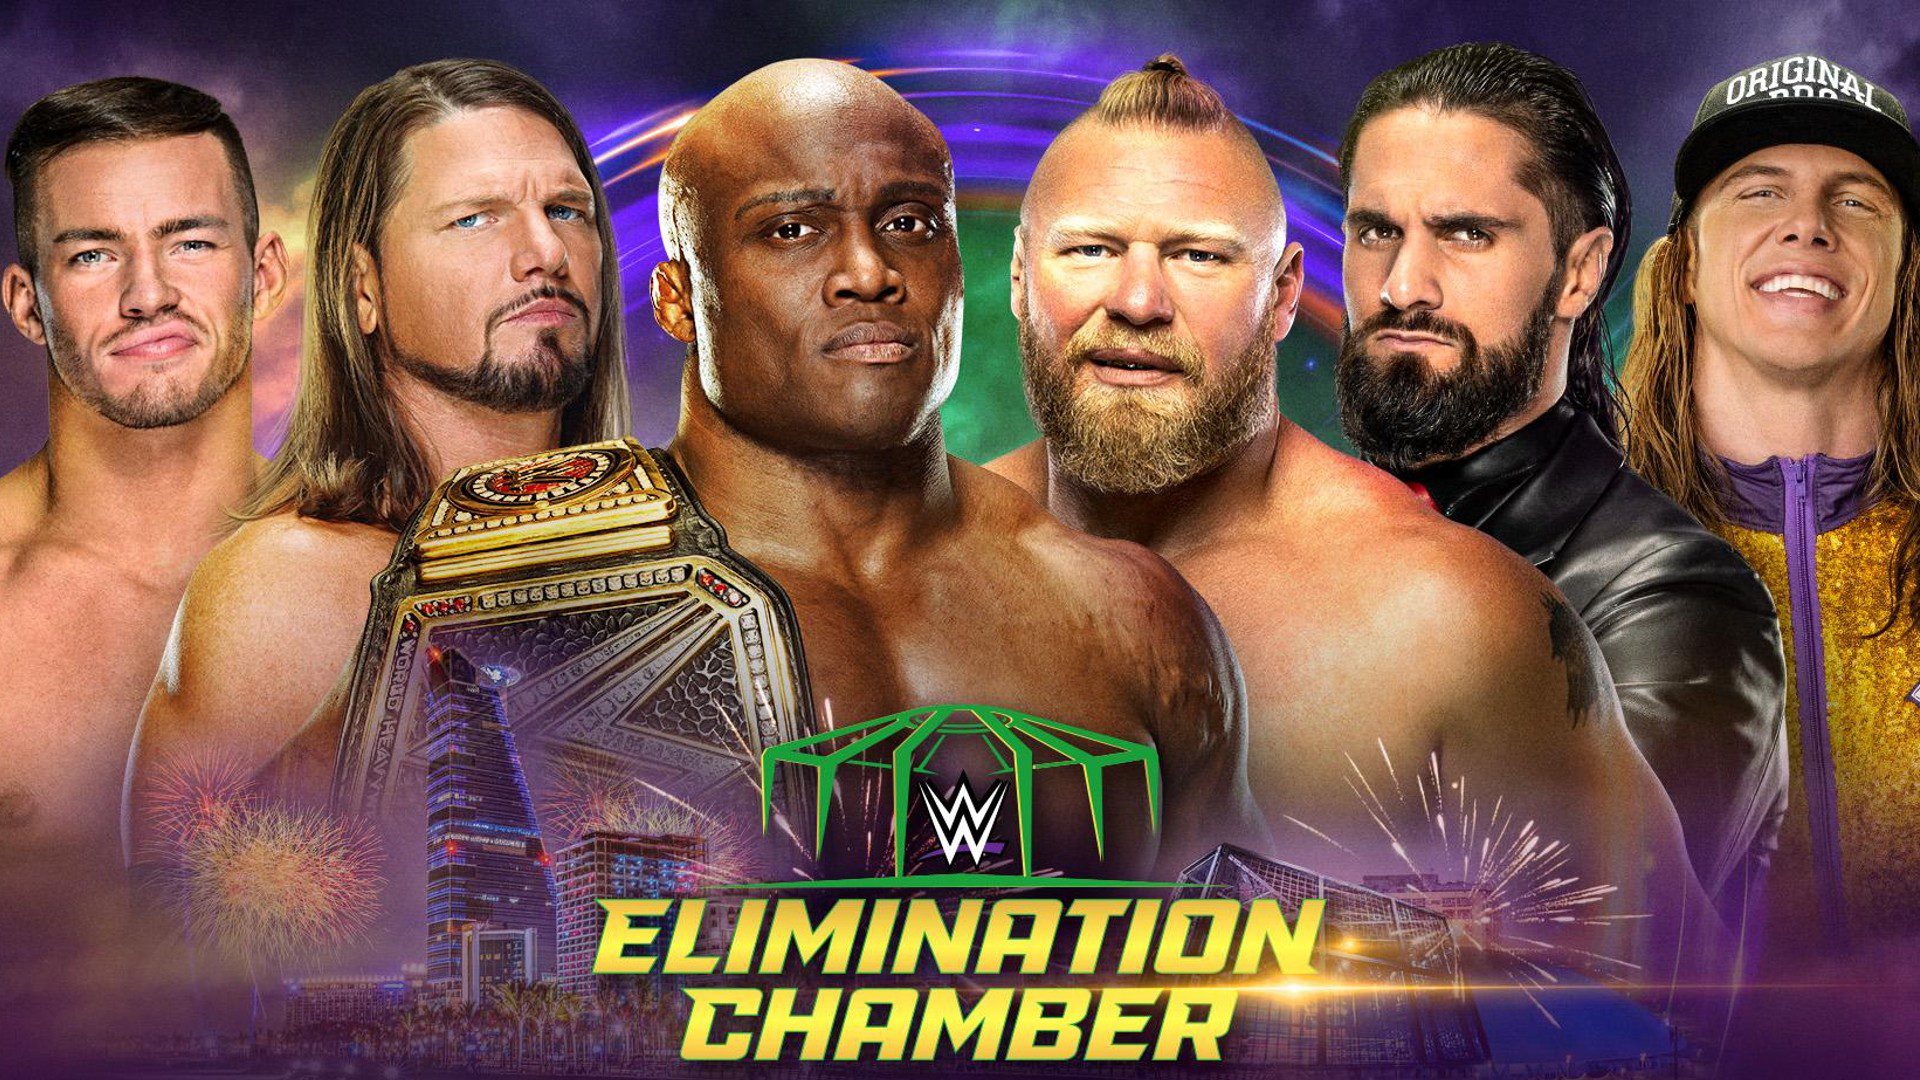 WWE Elimination Chamber Results For February 19, 2022